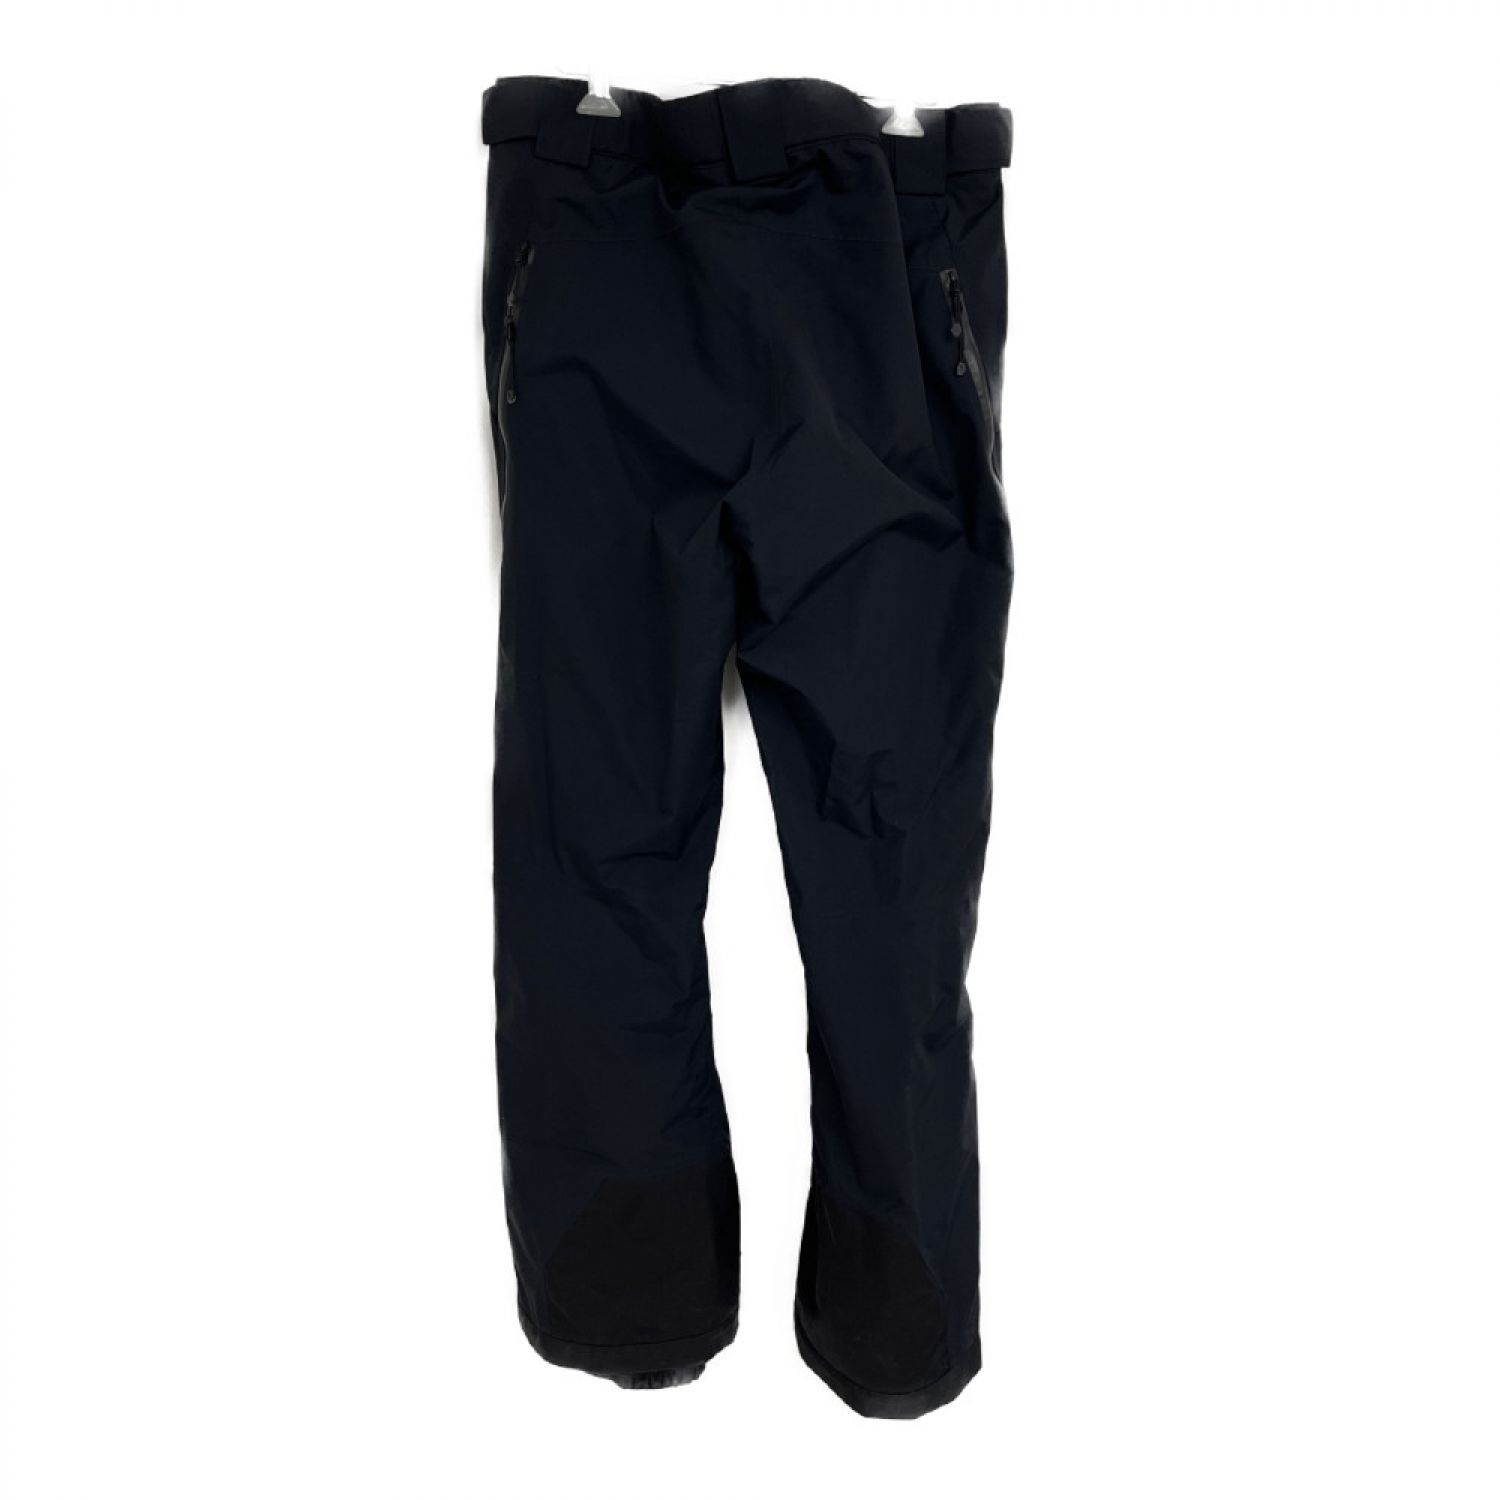 【THE NORTH FACE】Freedom Pant NS61810